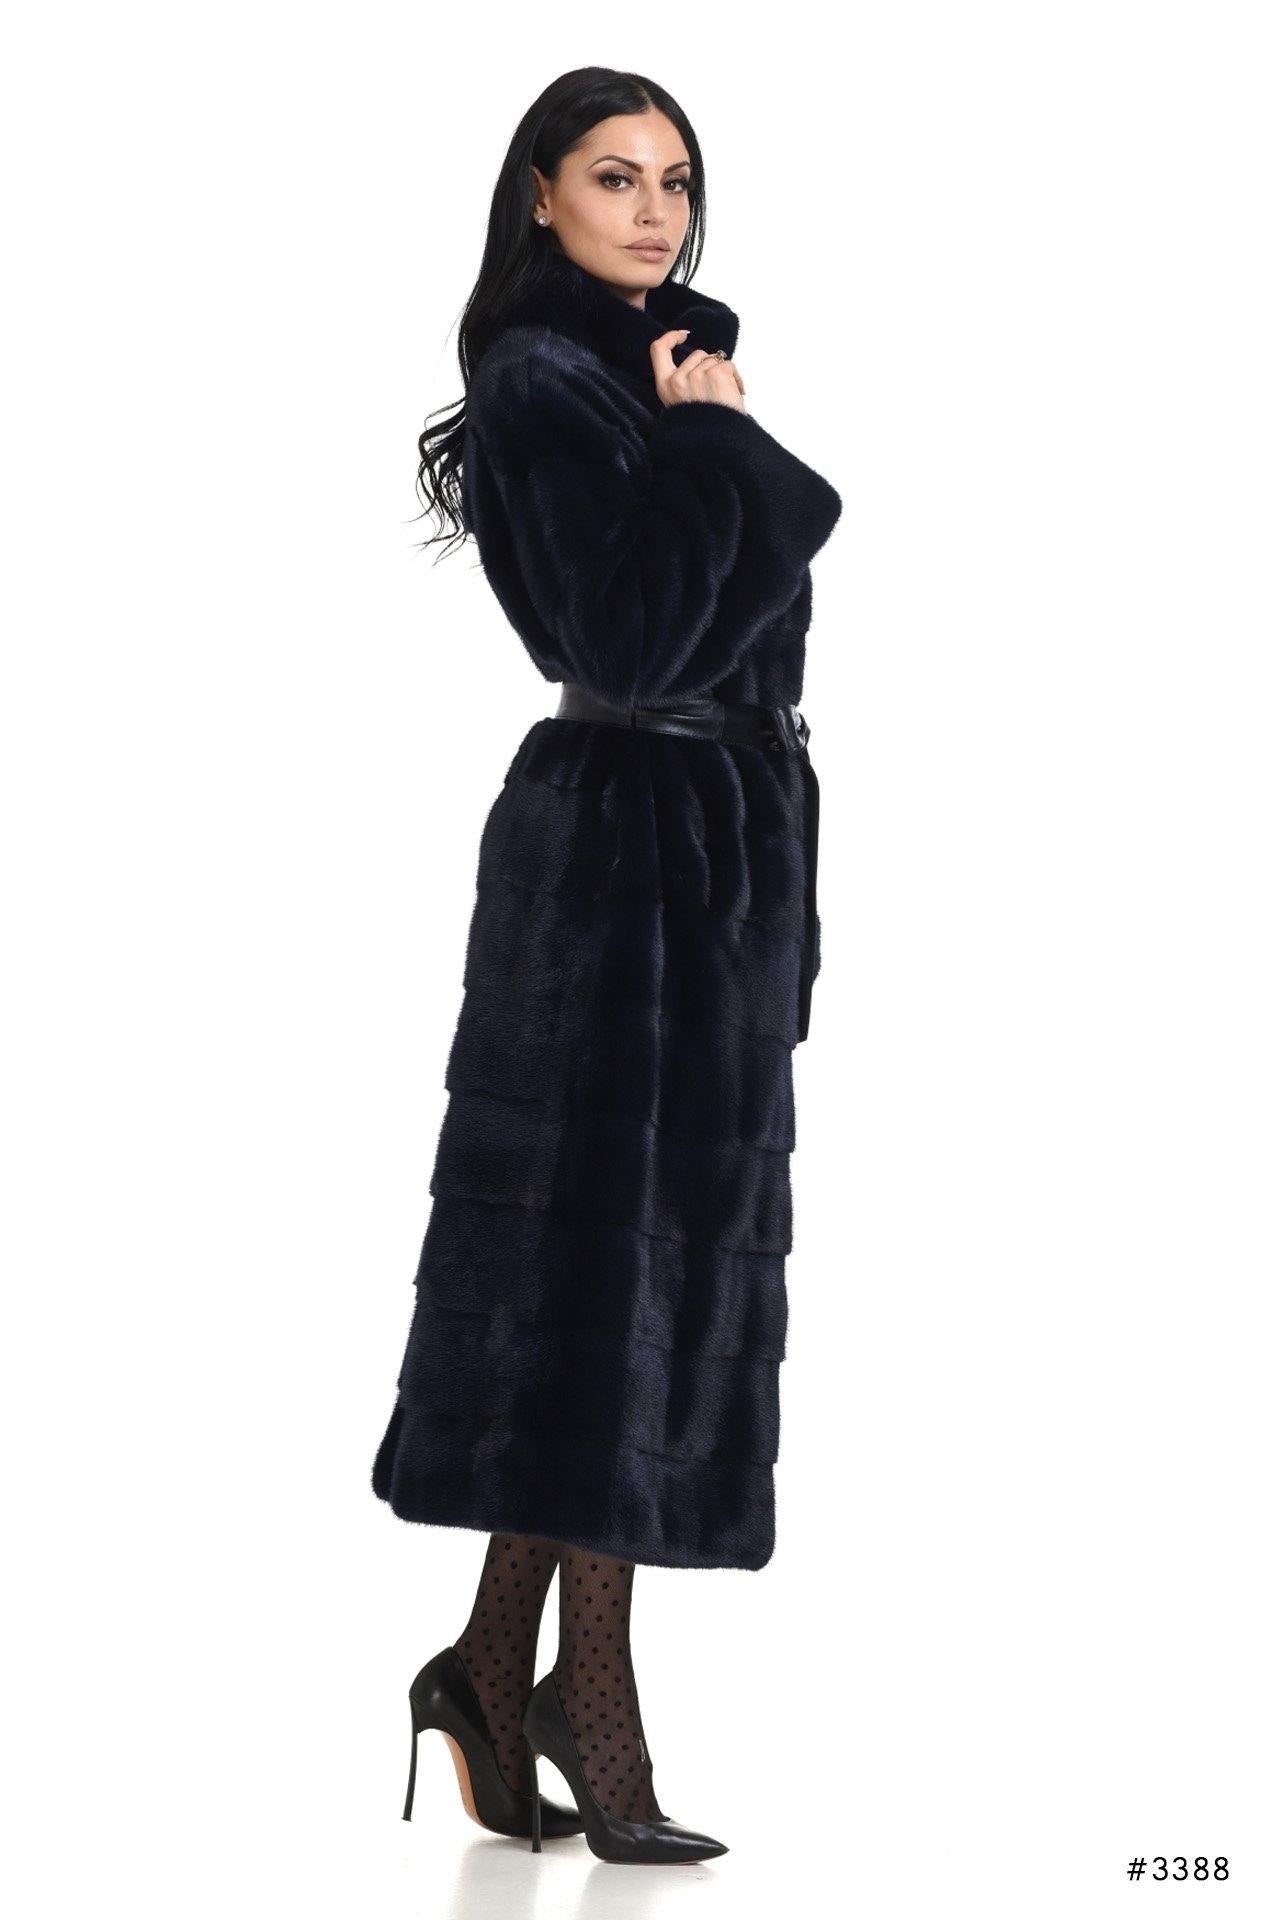 Long mink coat with stand up collar and leather belt - Manakas Frankfurt